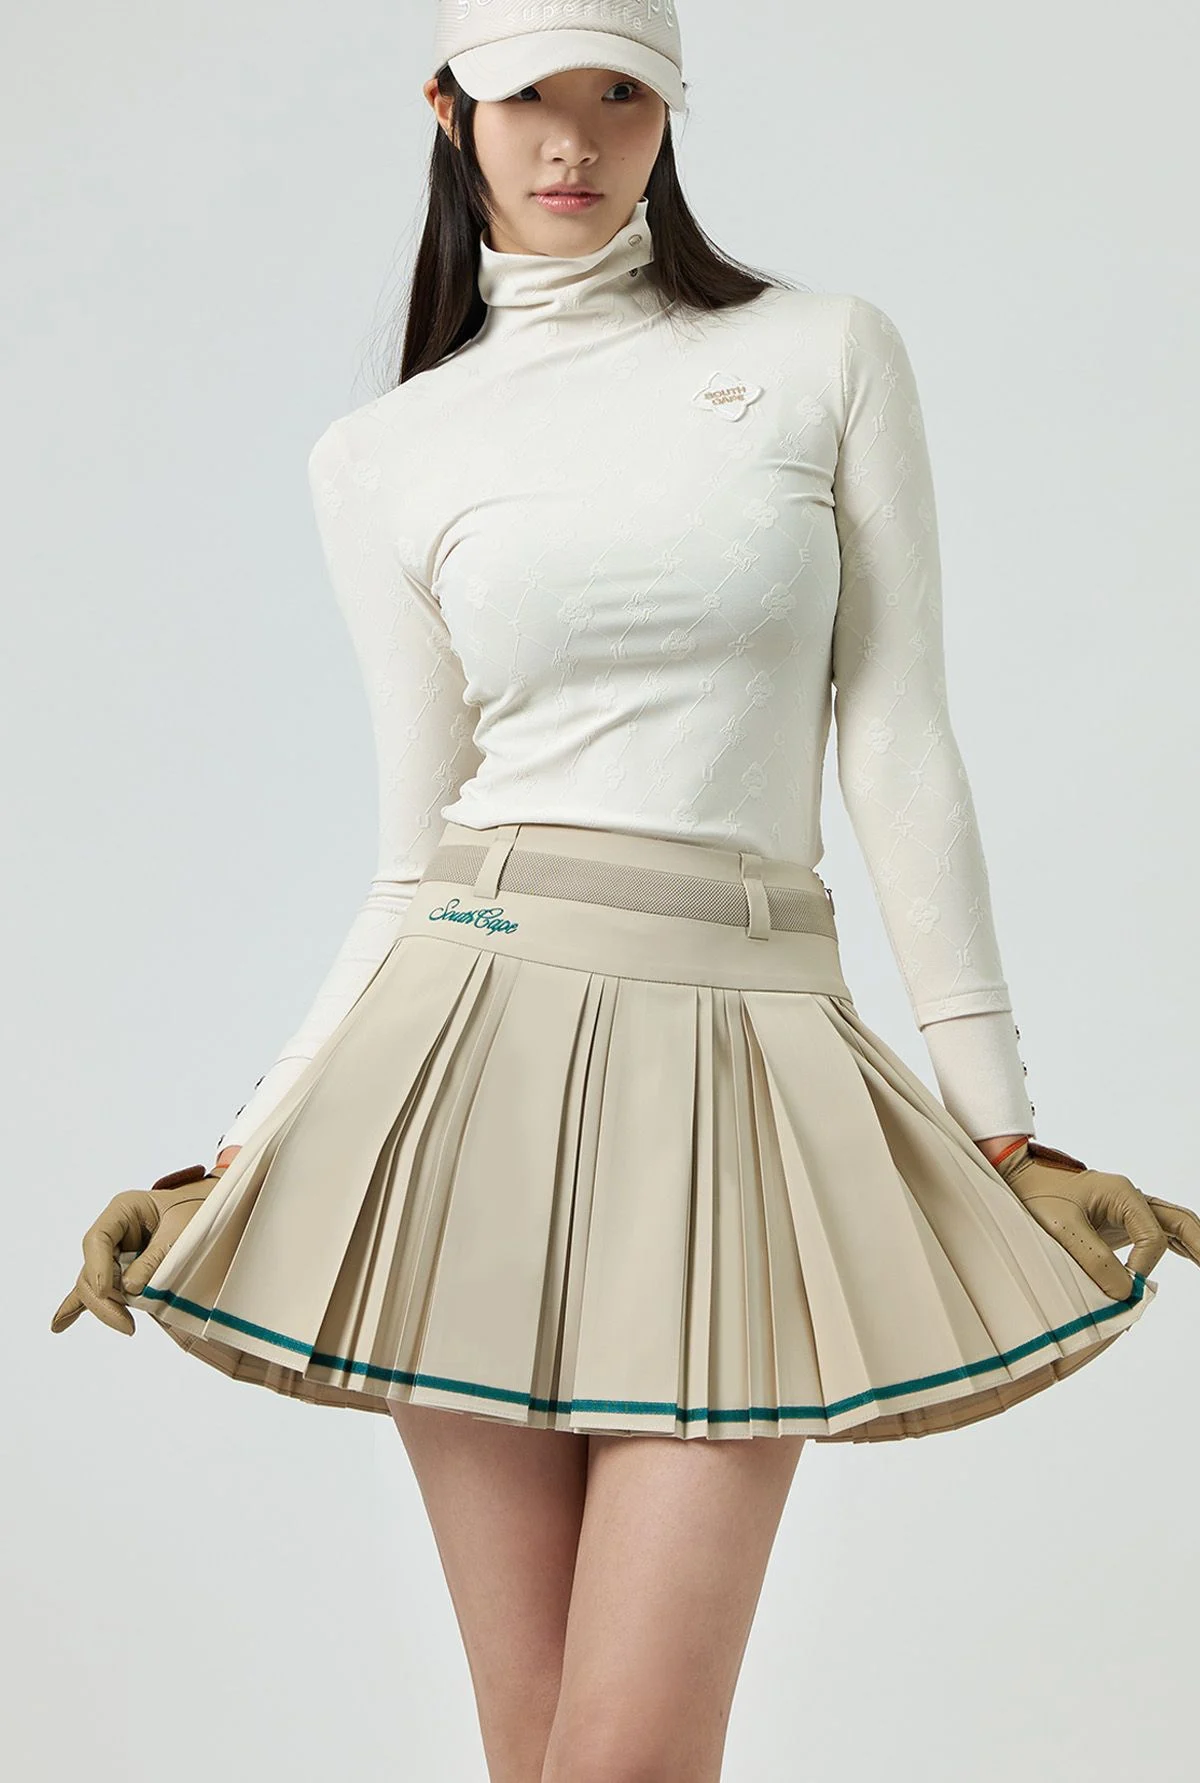 

South Cape Golf Pleated Skirt Women's Half length Short Skirt Fashionable Age Reducing Leisure Sports Outdoor Golf Dress